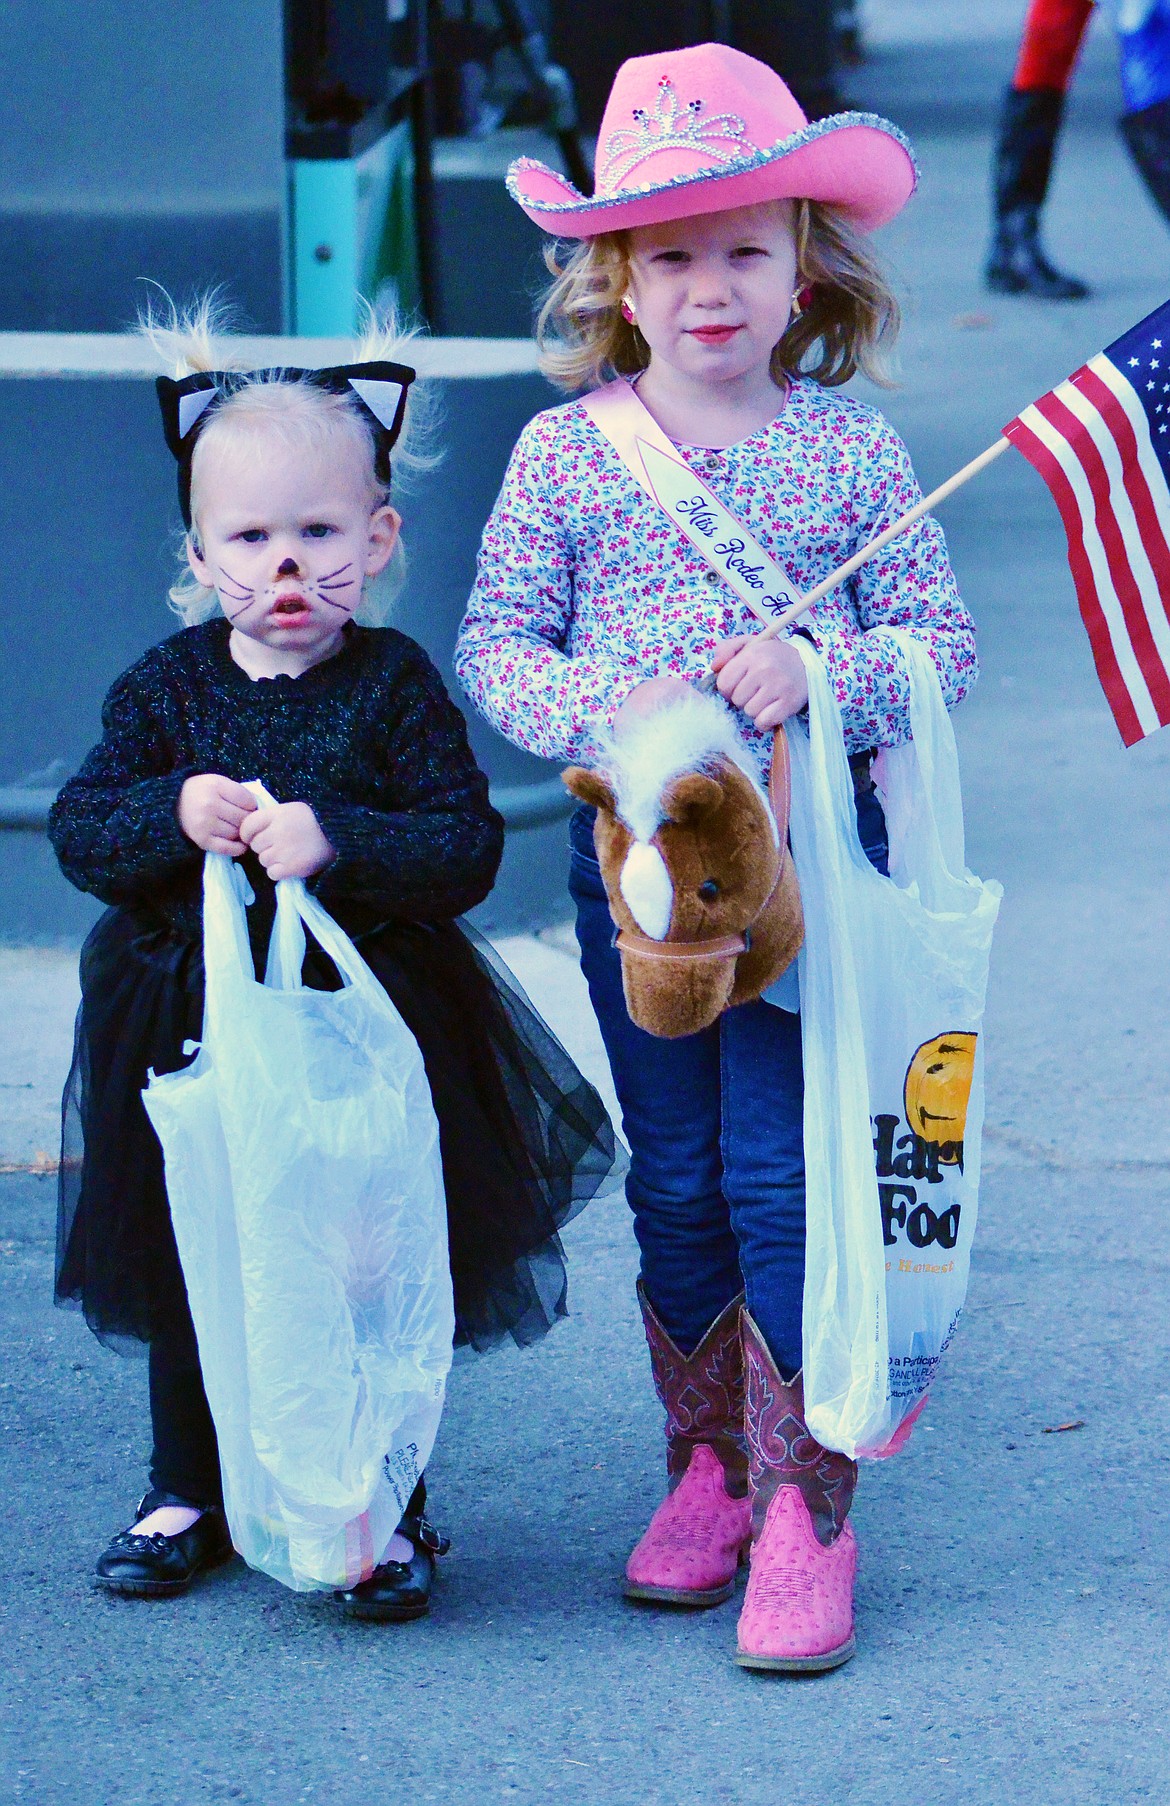 This young rodeo queen was trick or treating with a little cat.